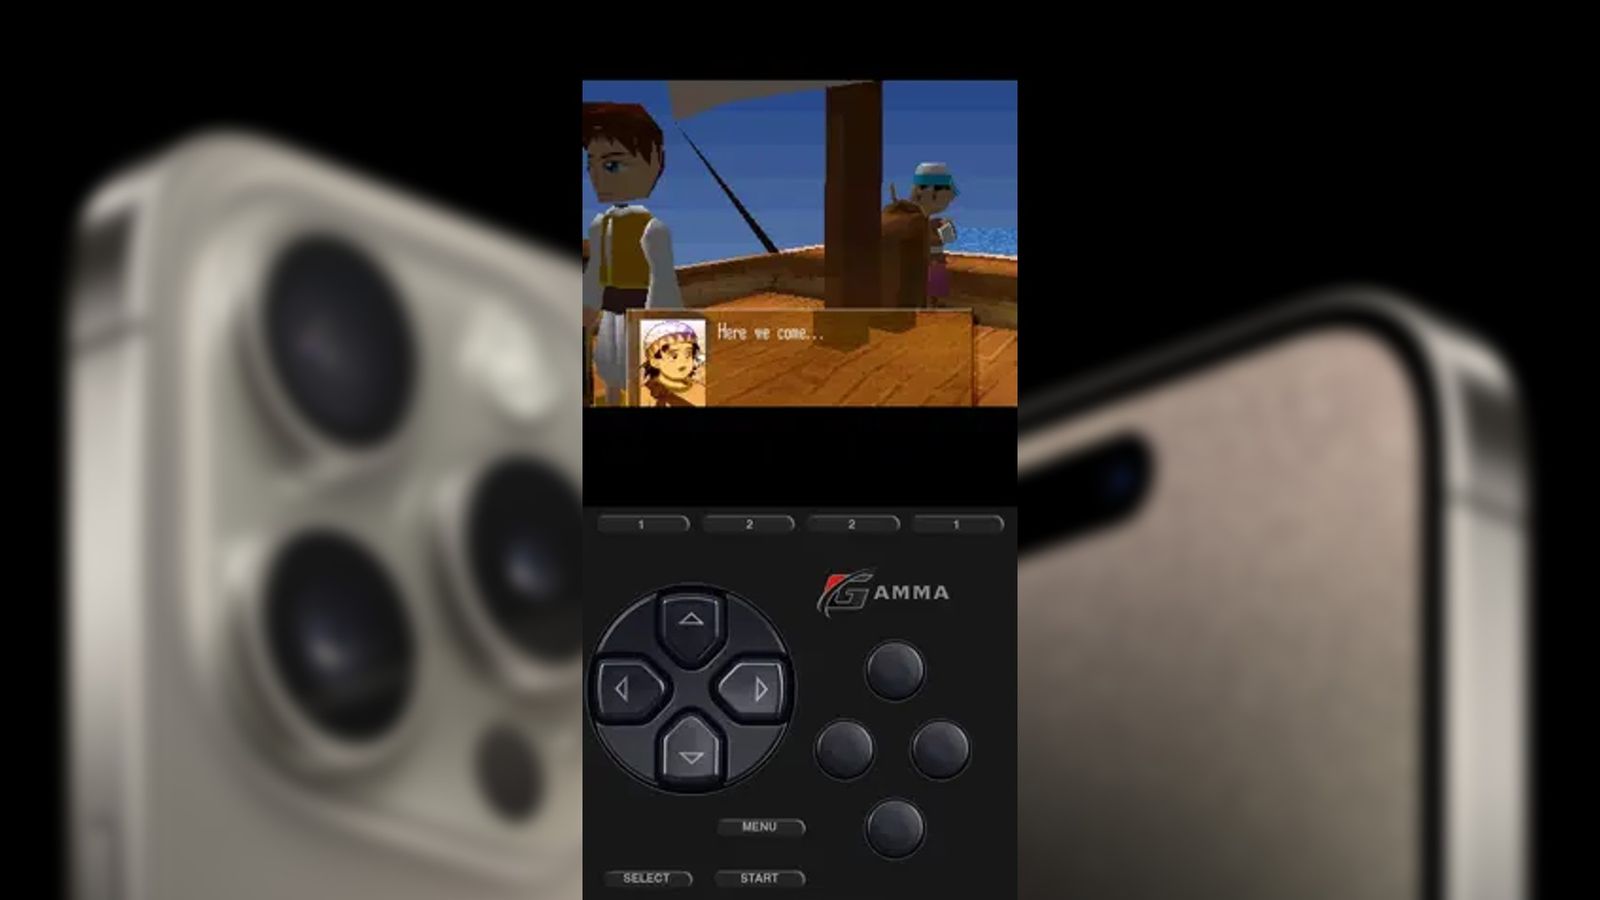 Gamma PS1 emulator on iPhone in front of an Apple press image of iPhone 15 Pro Max